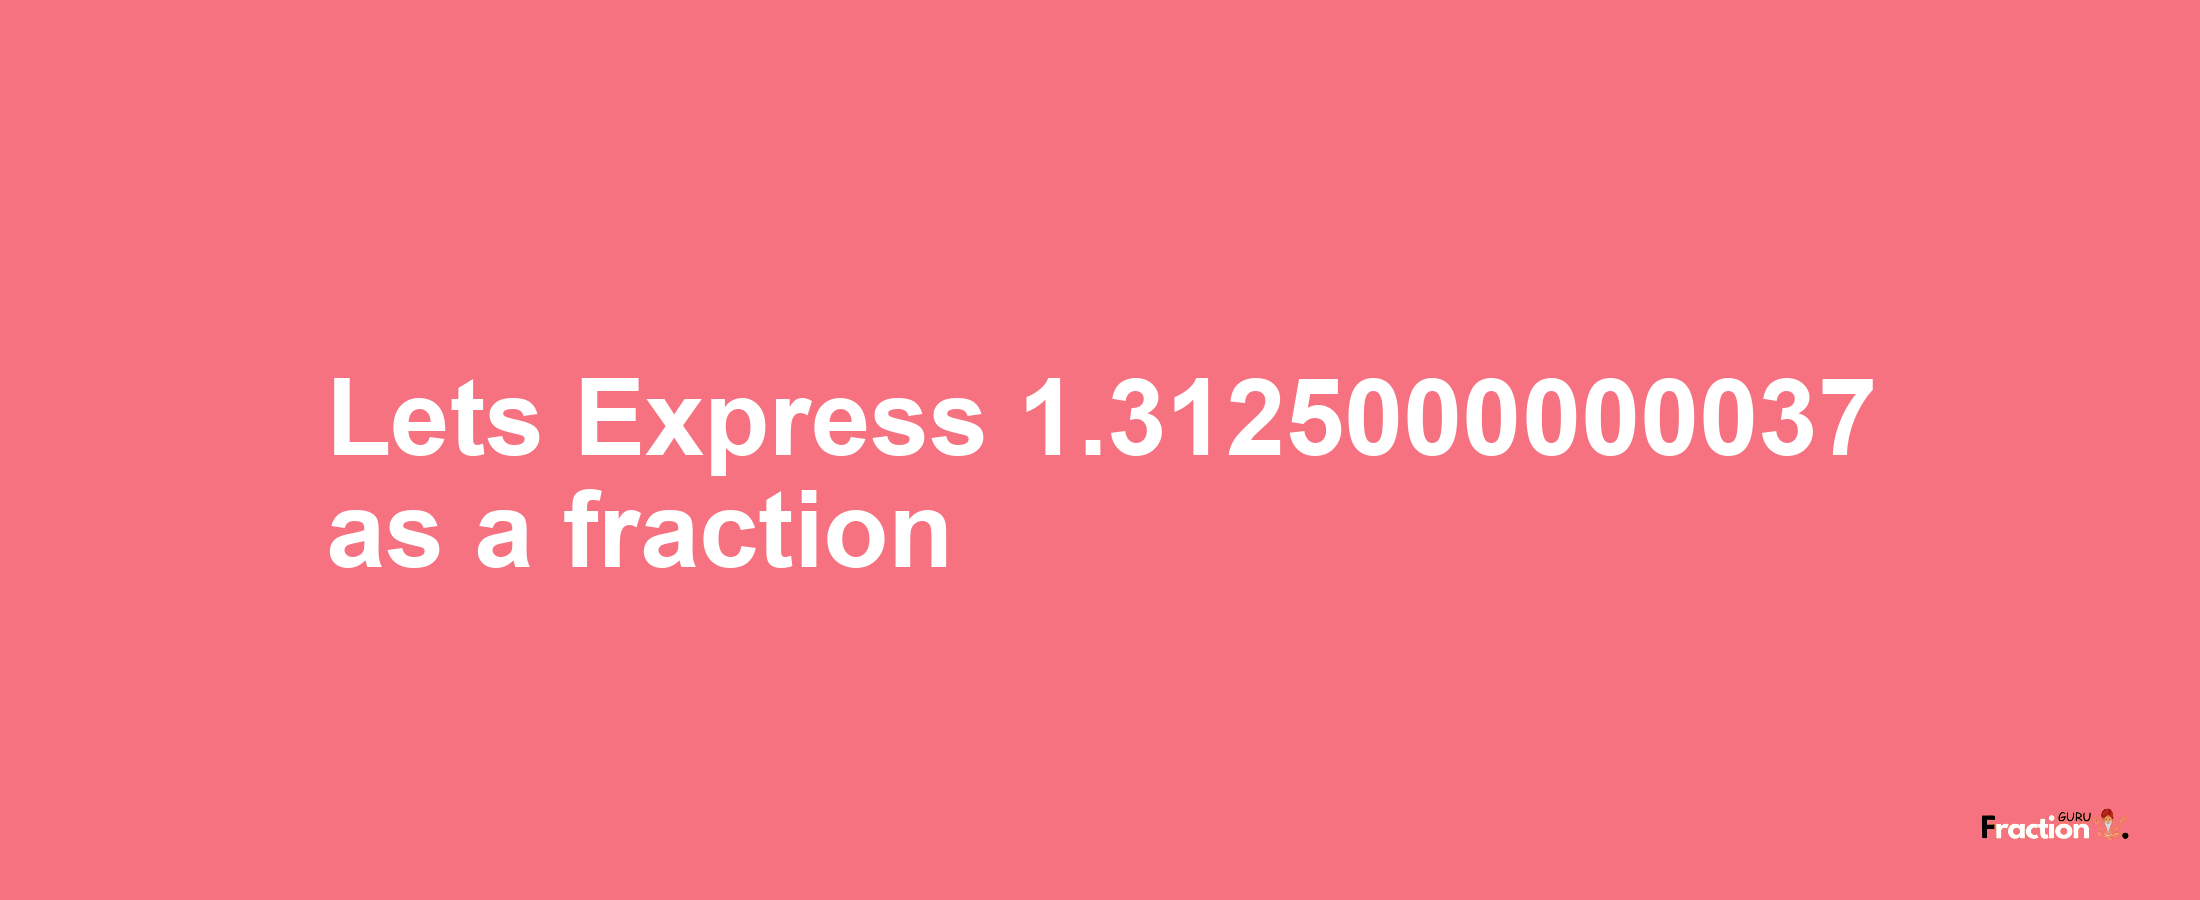 Lets Express 1.3125000000037 as afraction